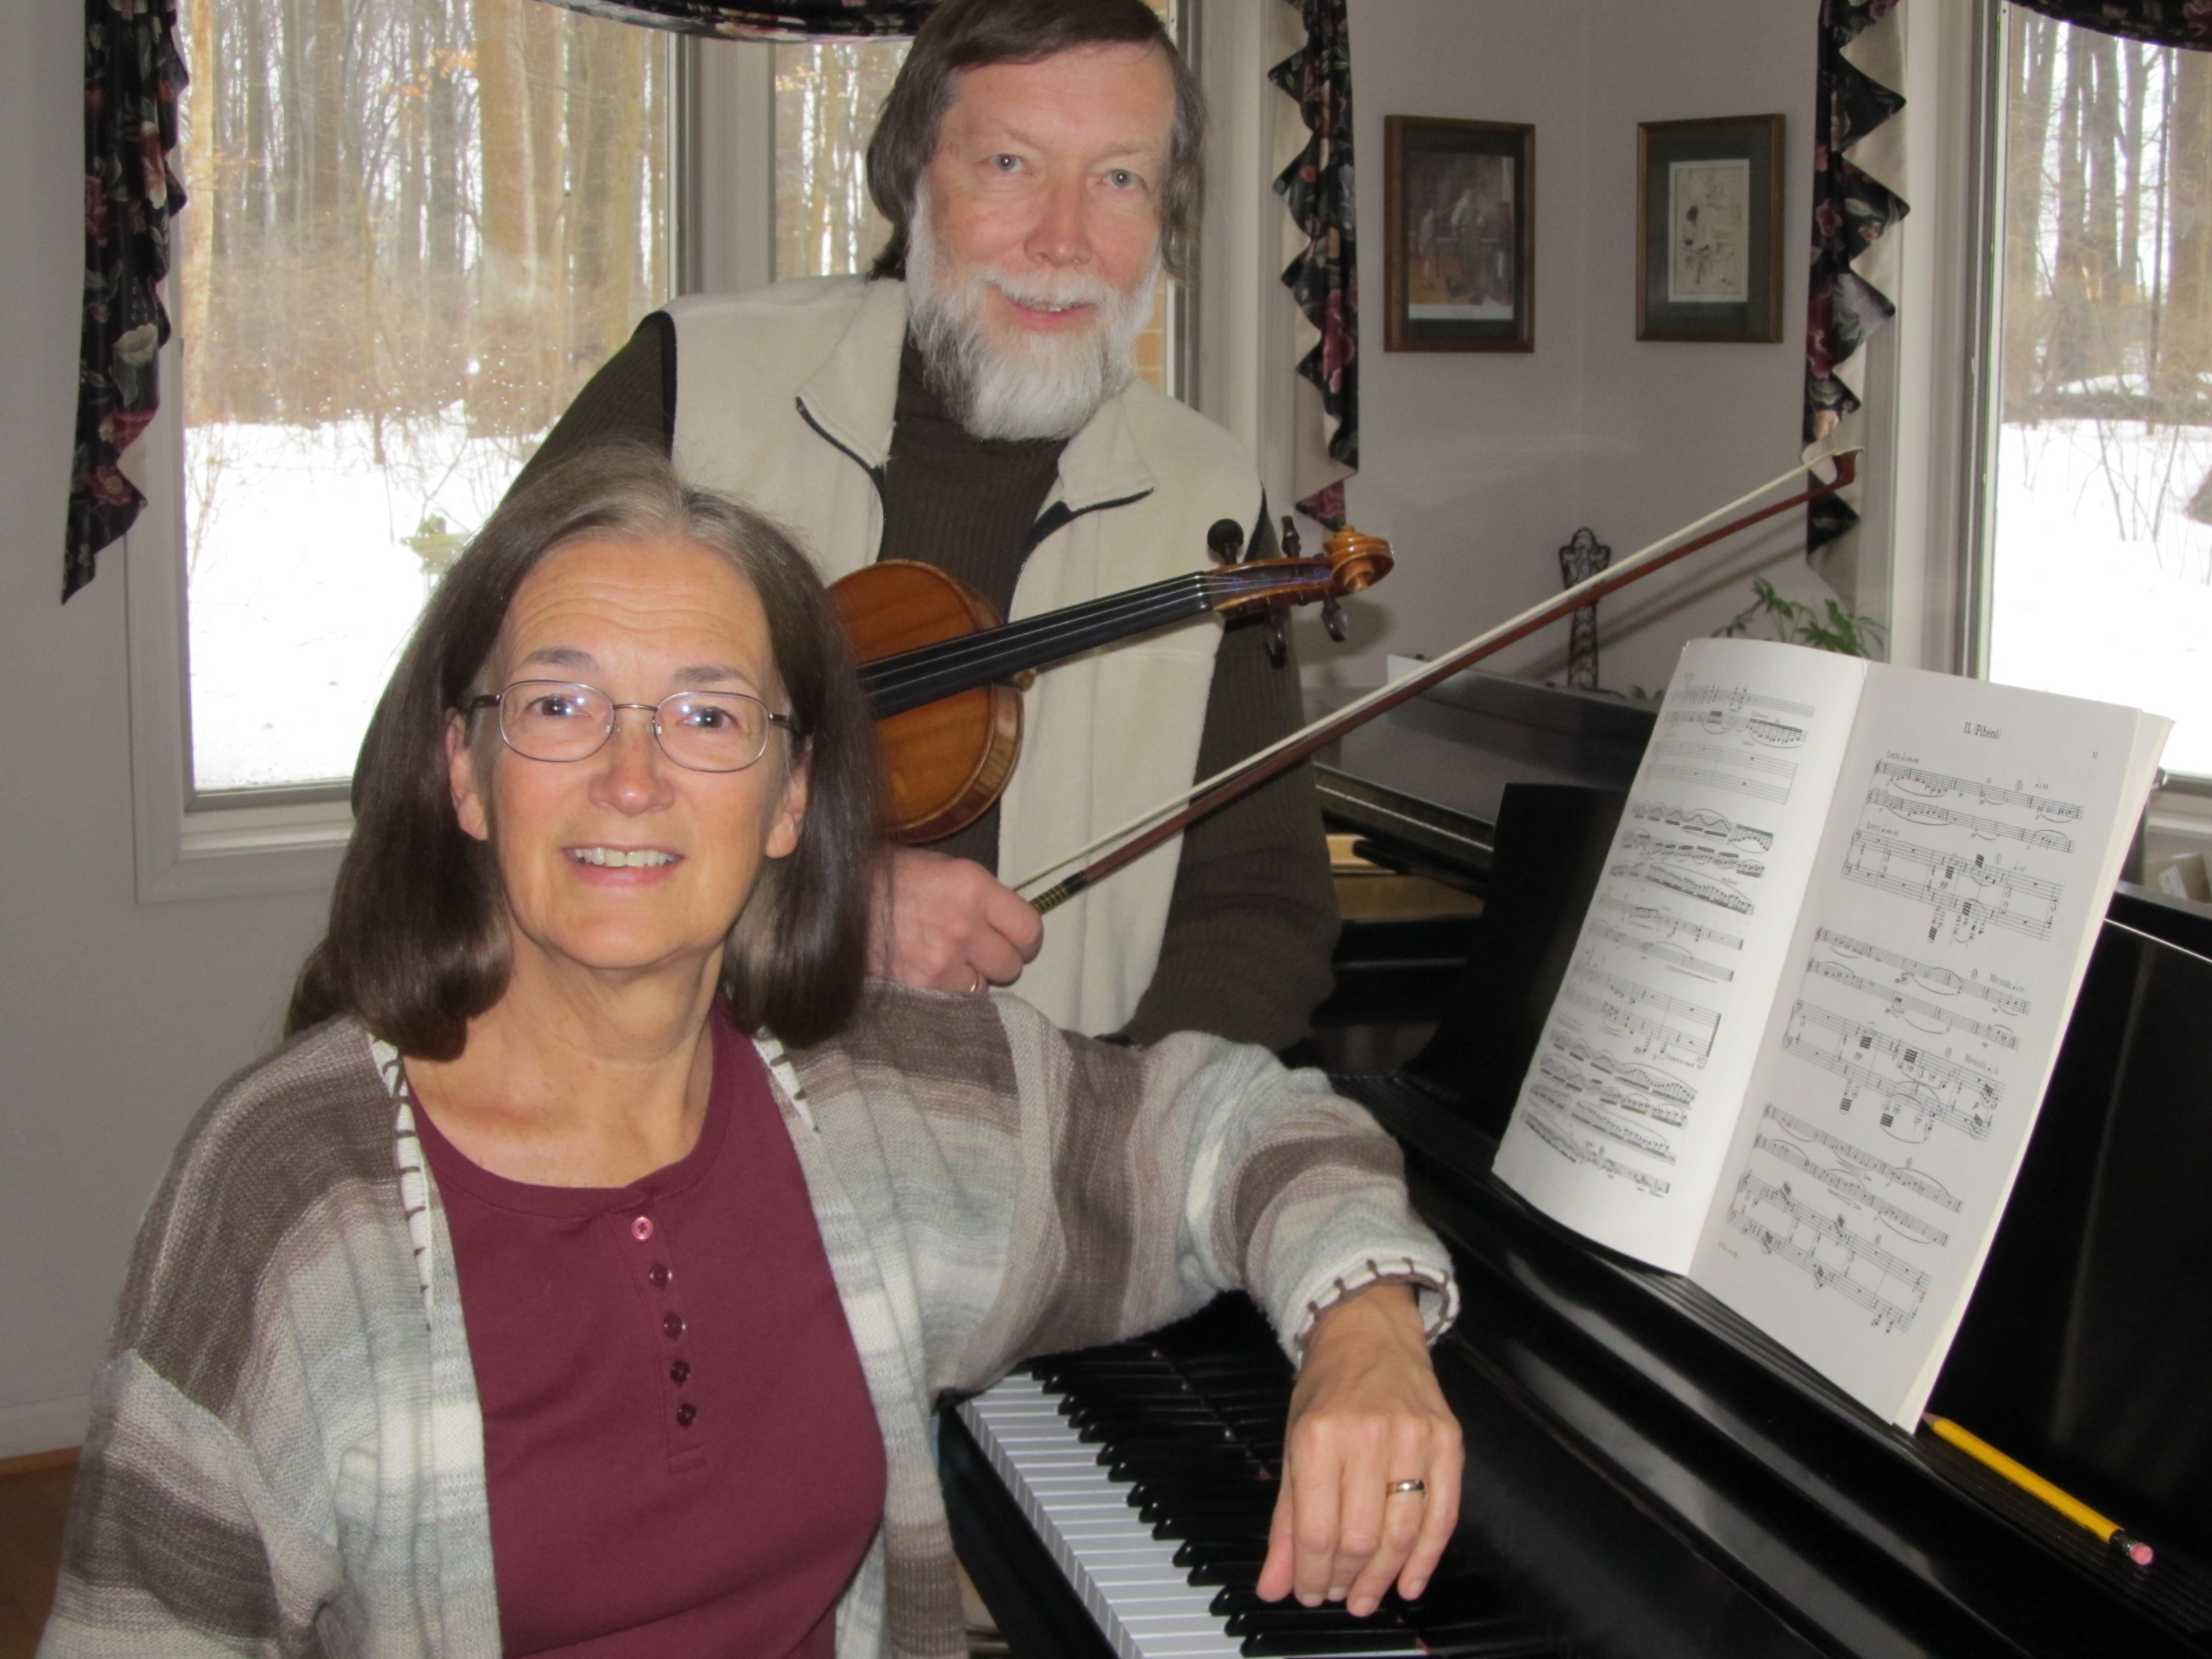 Donna sits at the piano with Martin holding a violin